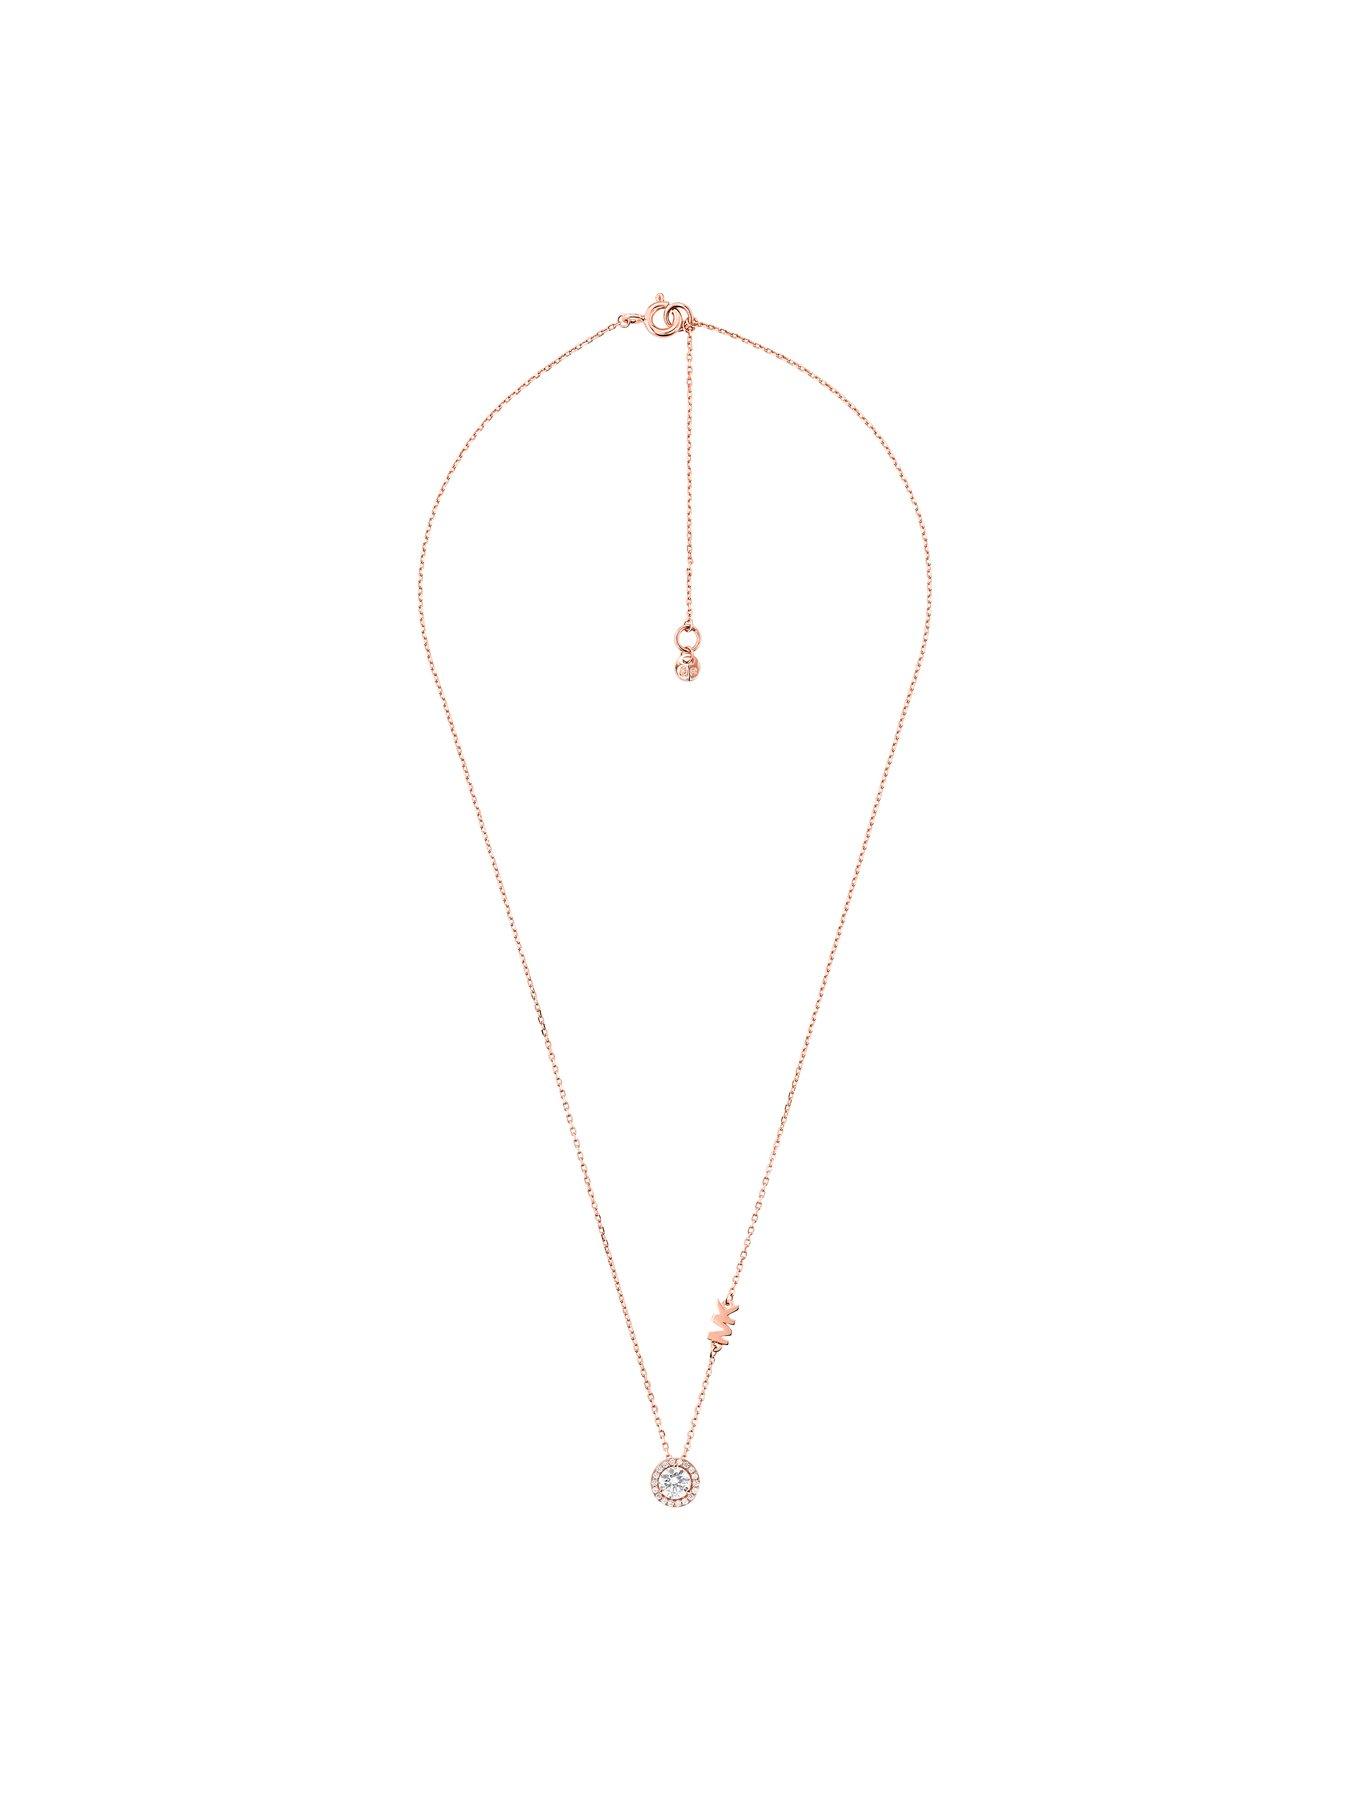  Michael Kors Rose Gold Plated Sterling Silver and Cubic Zirconia Logo Ladies Necklace